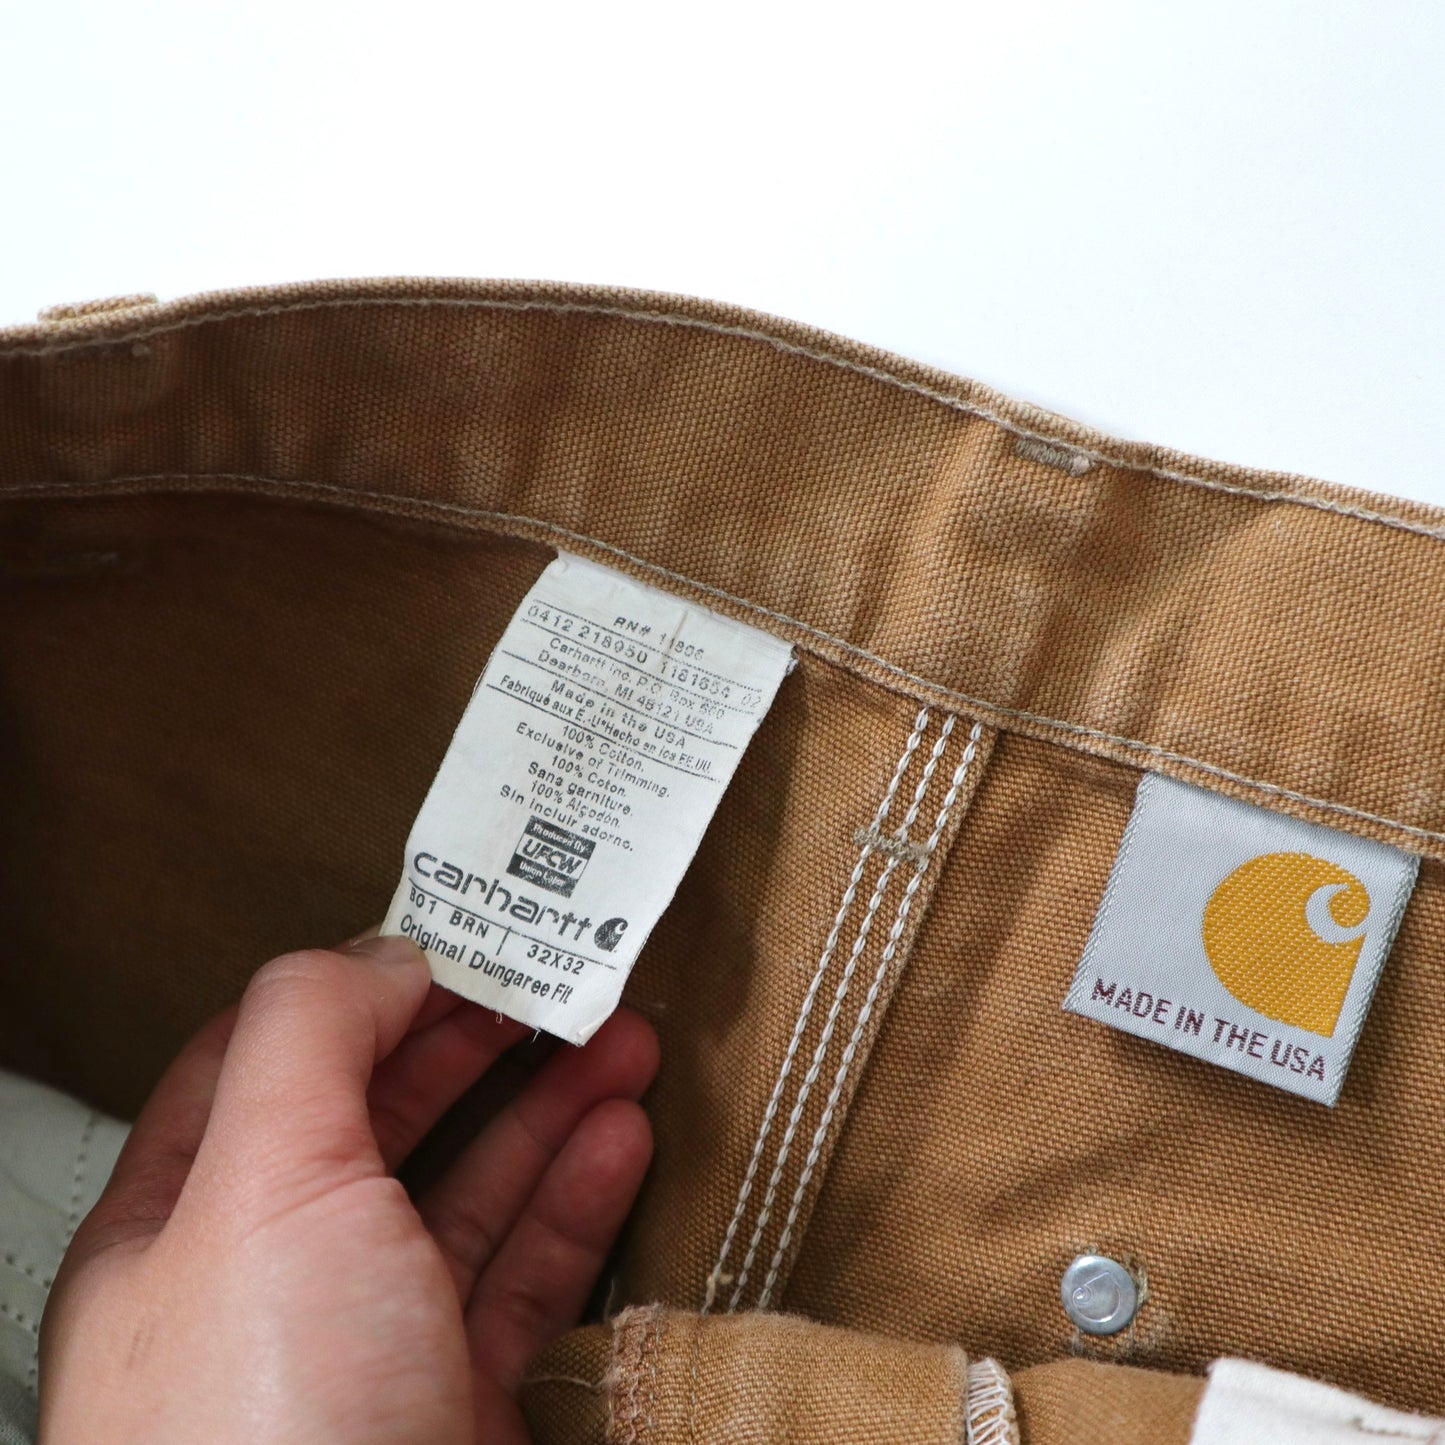 (31W) American-made Carhartt double knee brown paint-splashed work pants